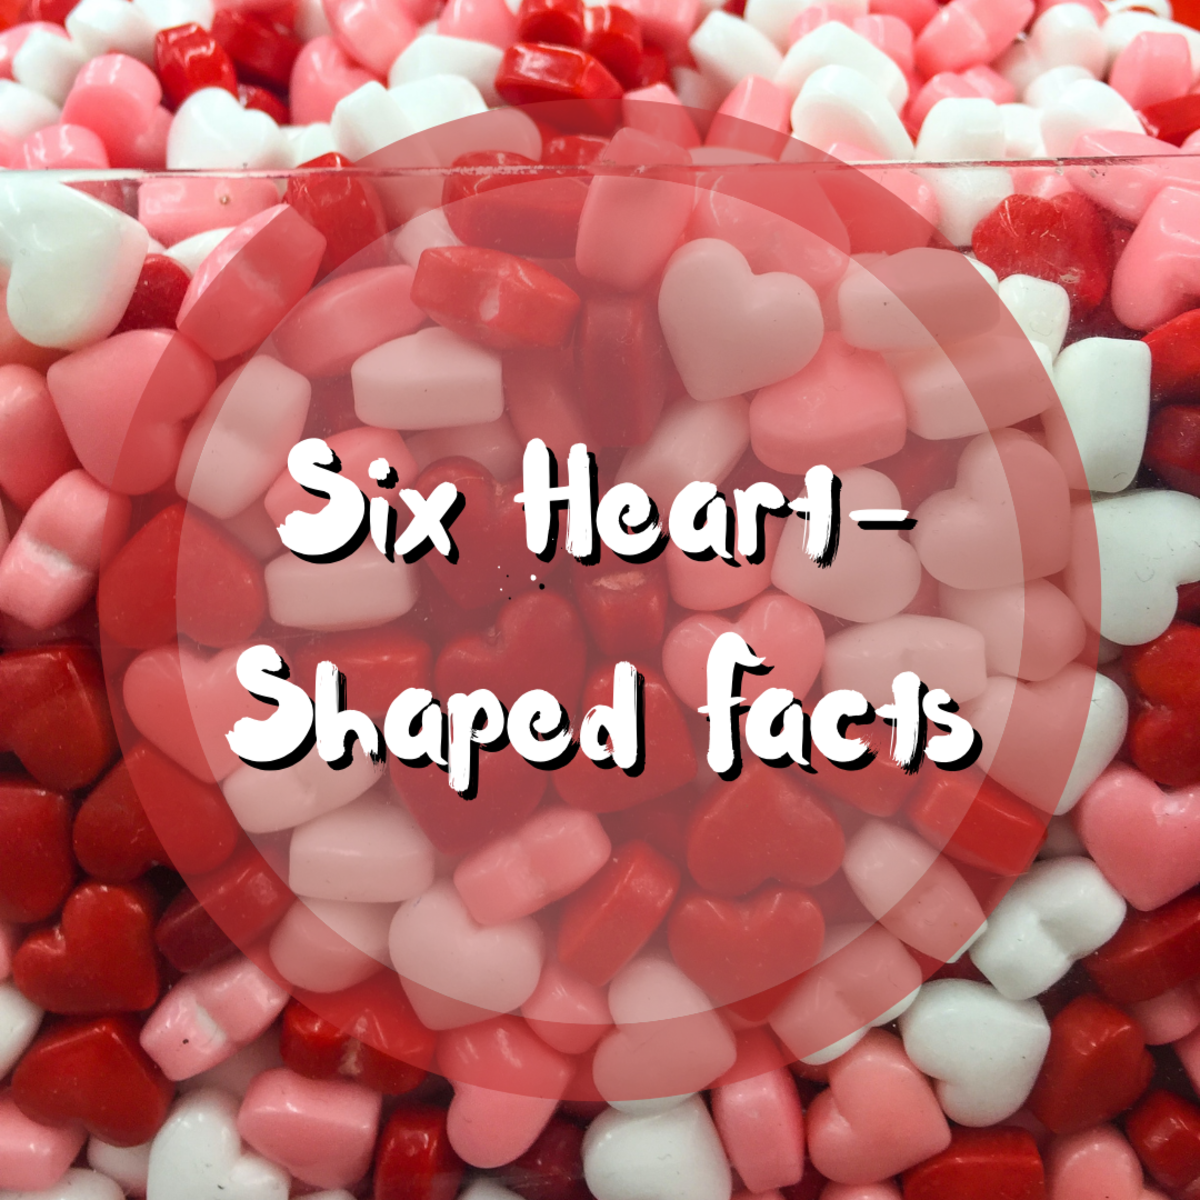 6 Weird Facts About Hearts and Heart-Shaped Things